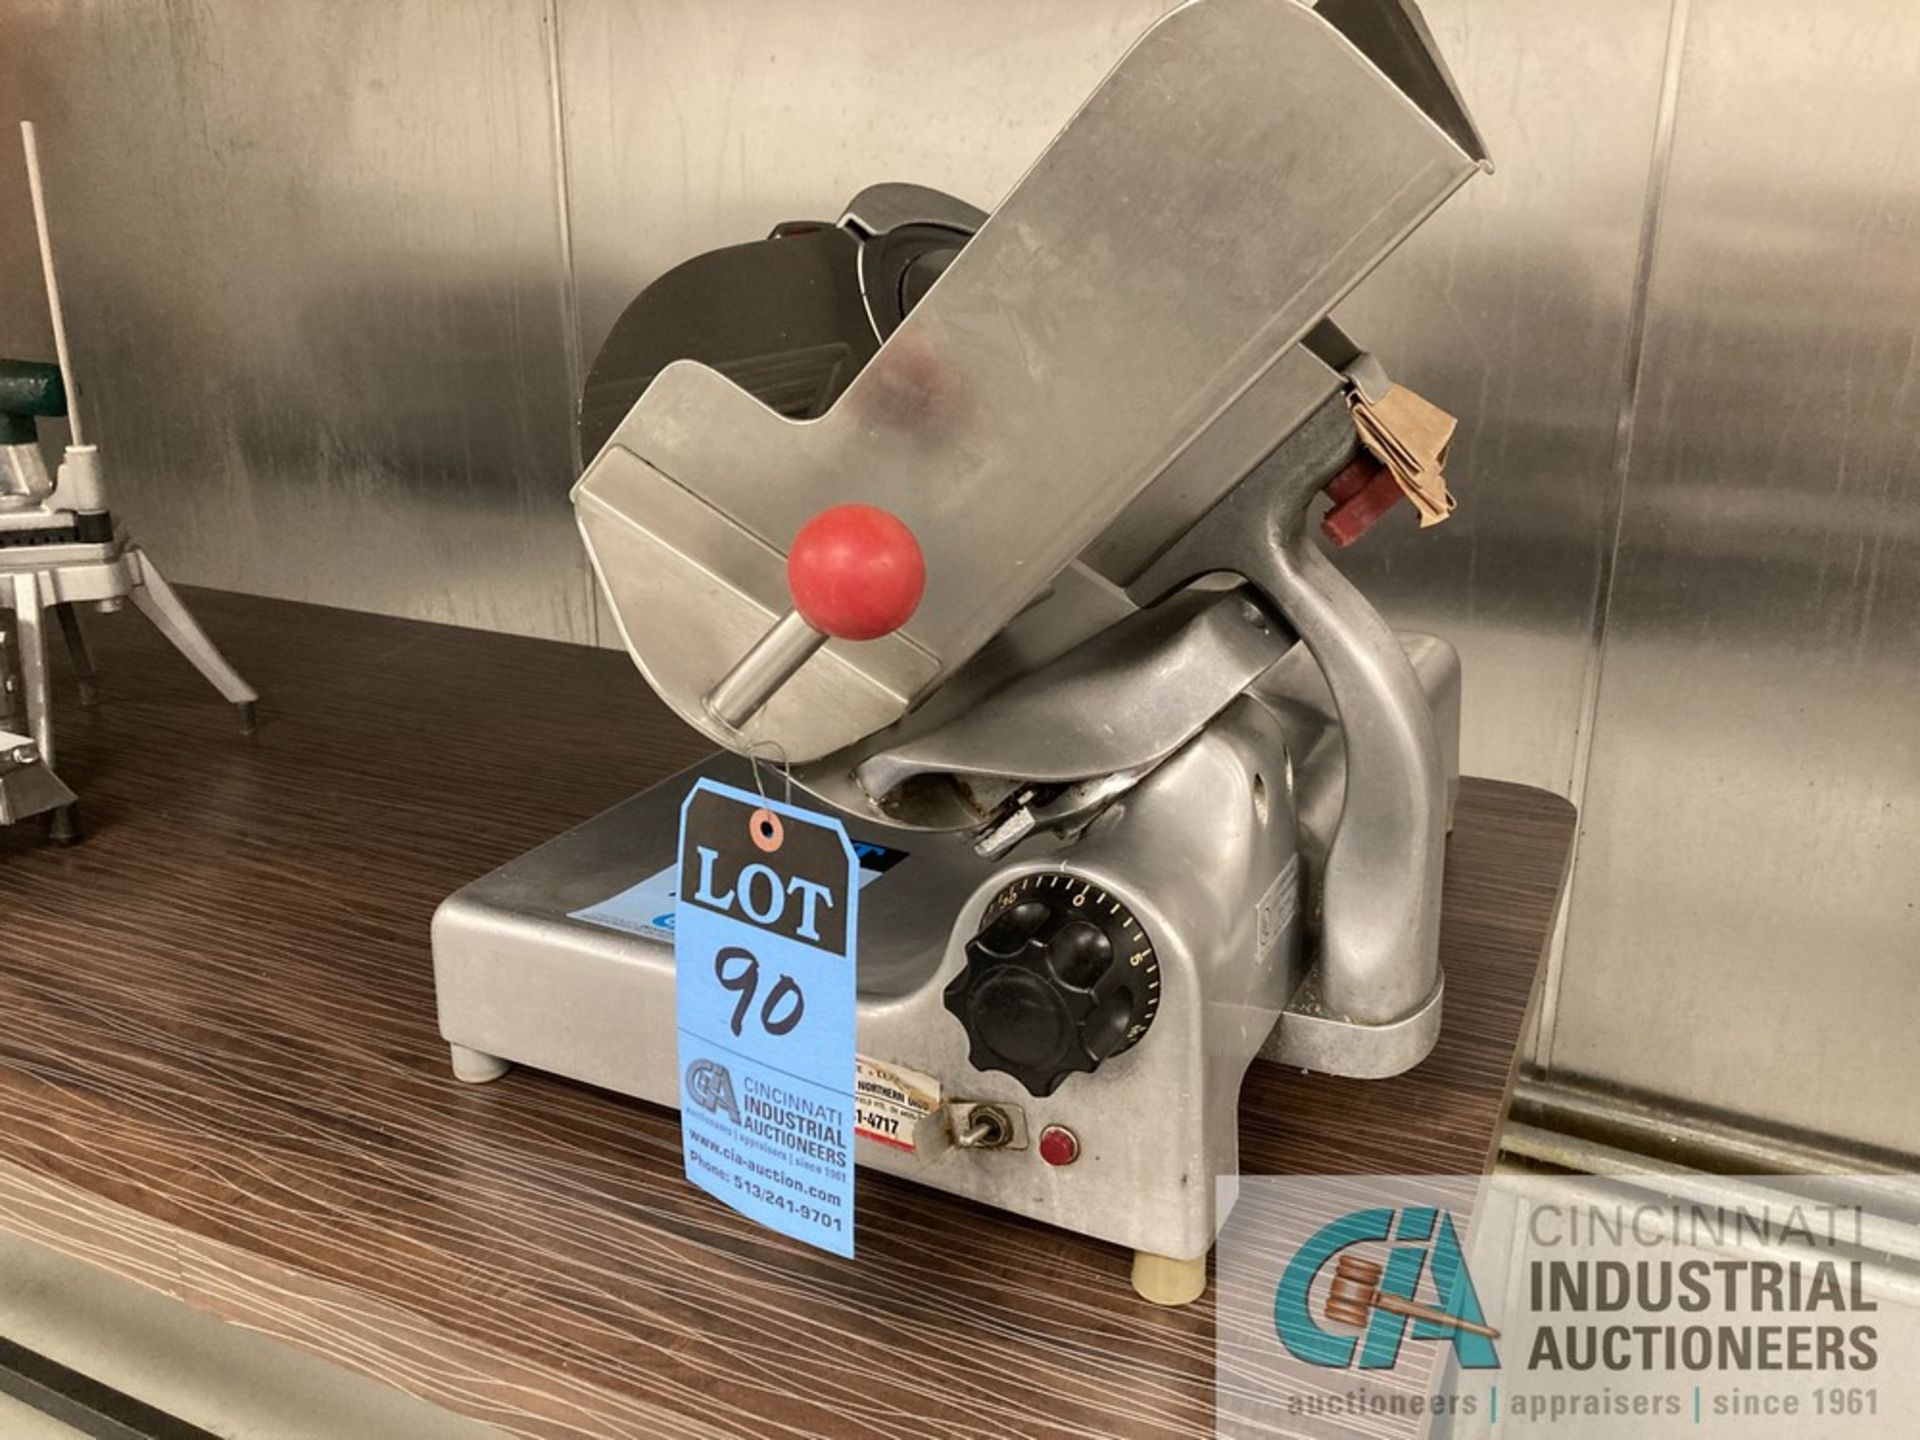 BERKEL MEAT SLICER **For convenience, the loading fee of $50.00 will be added to the invoice and